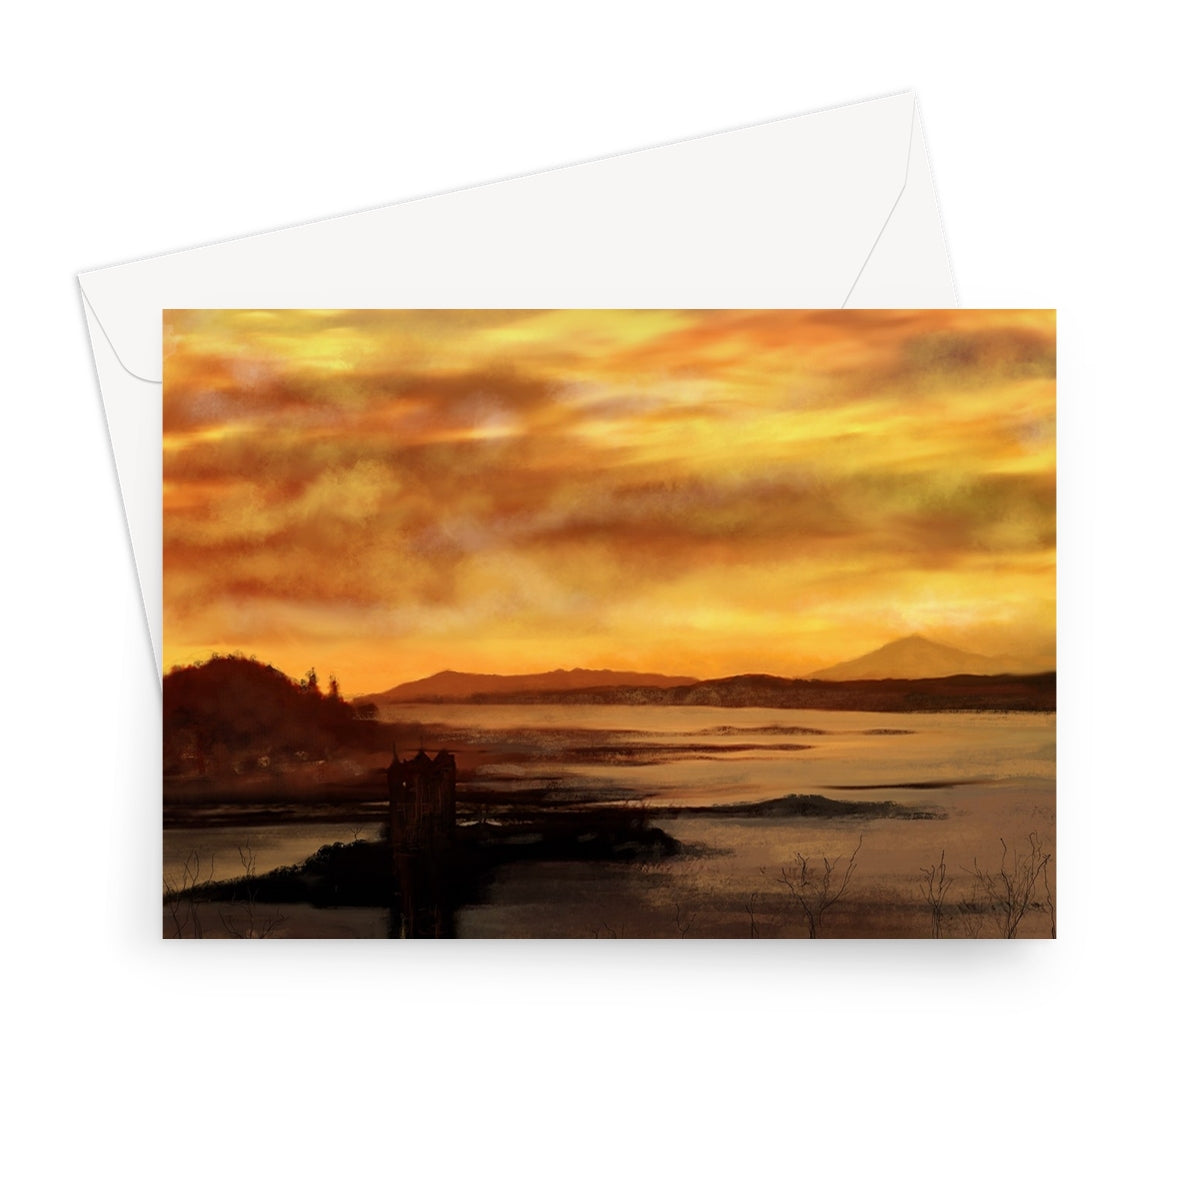 Castle Stalker Dusk Art Gifts Greeting Card-Greetings Cards-Historic & Iconic Scotland Art Gallery-7"x5"-10 Cards-Paintings, Prints, Homeware, Art Gifts From Scotland By Scottish Artist Kevin Hunter